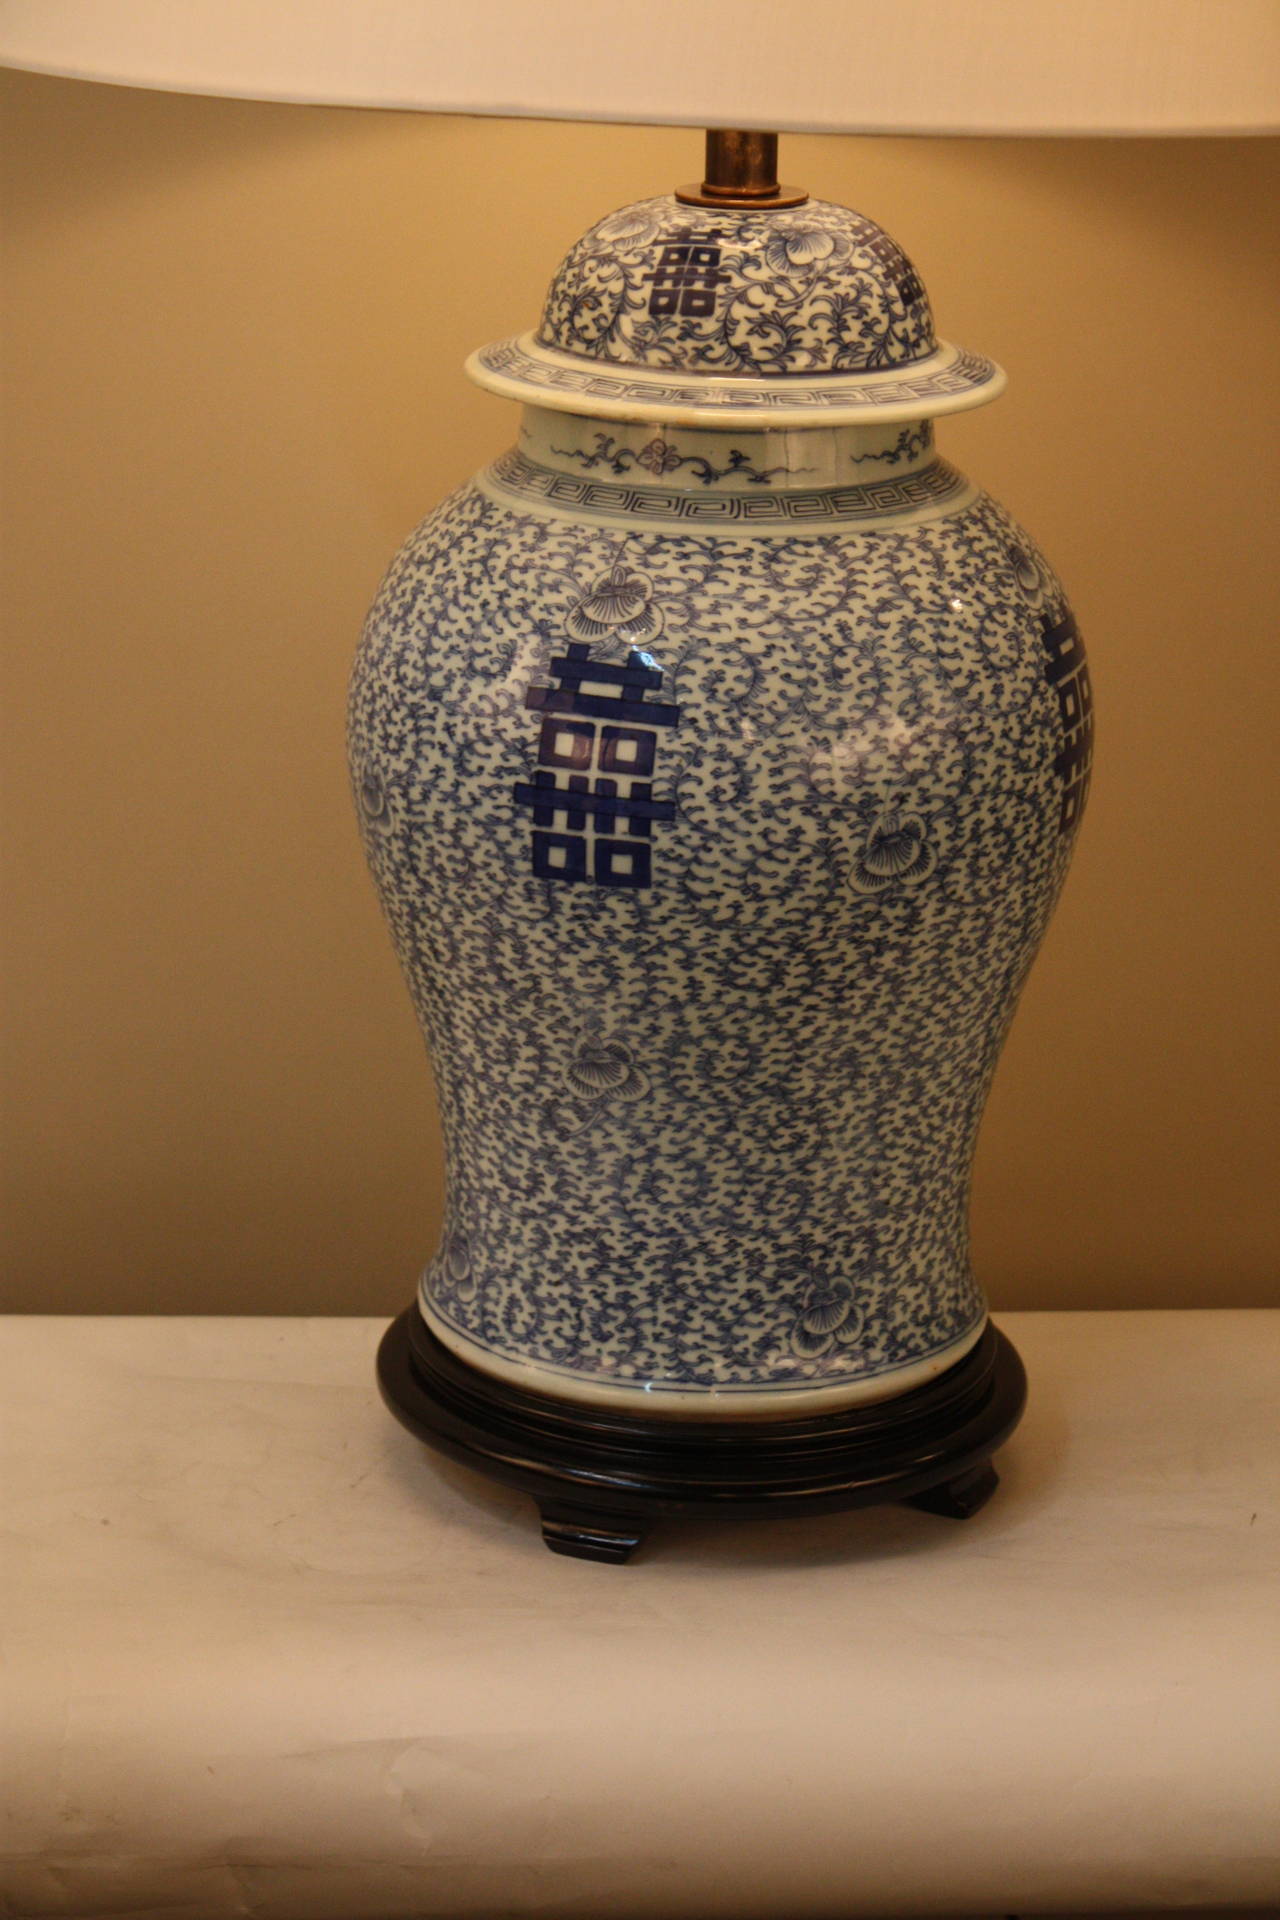 A 19th century Chinese ginger gar porcelain vase in blue decoration and sign of double happiness that has been made to a beautiful table lamp.